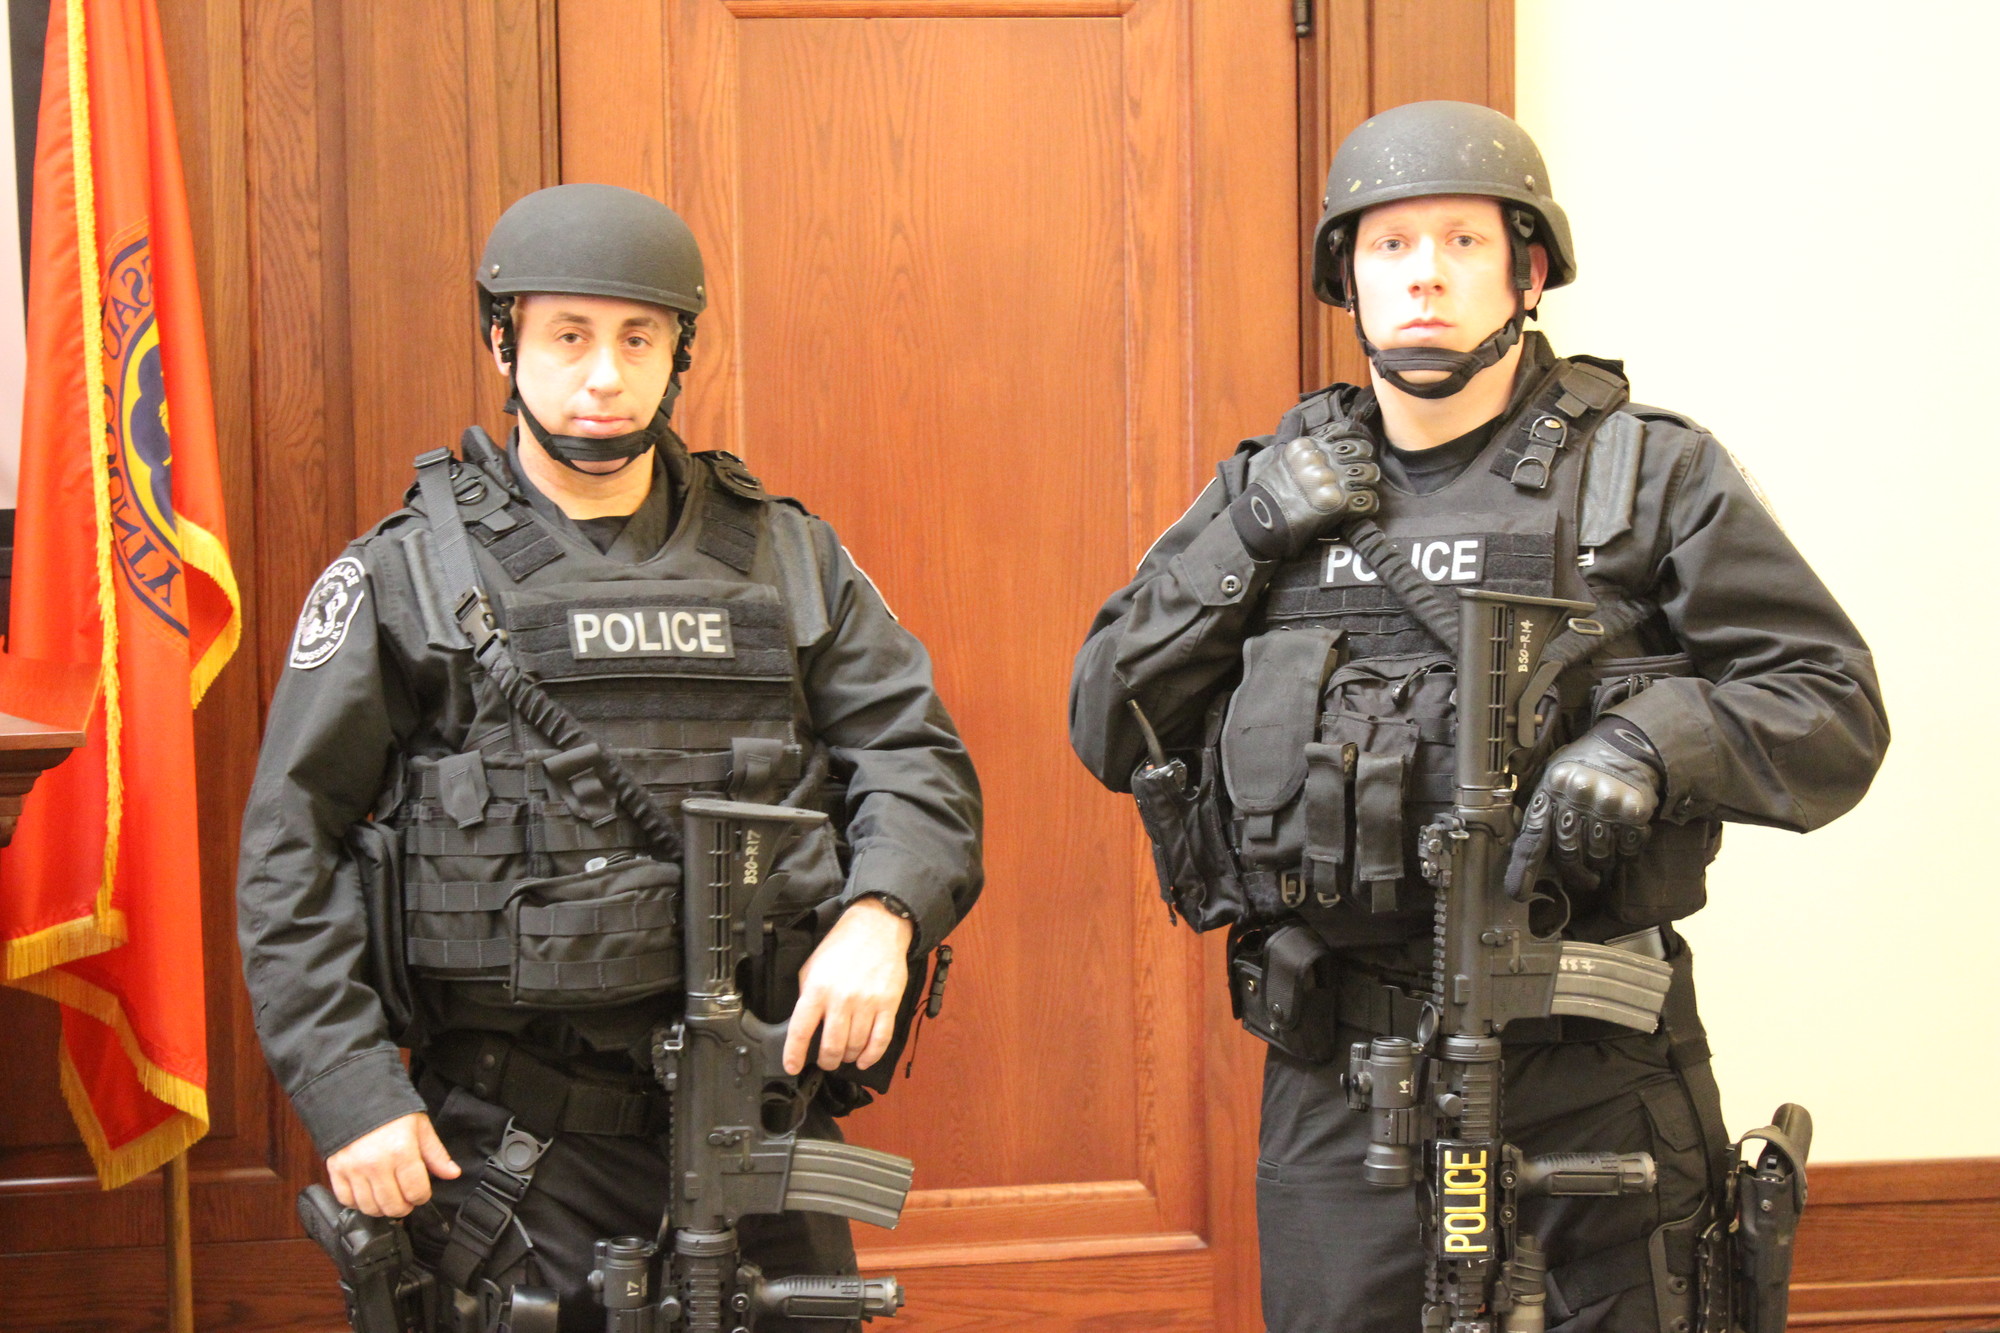 Officer Michael Jacoviello, left, and Officer Daniel Clarke, are two tactically trained police officers with the county.